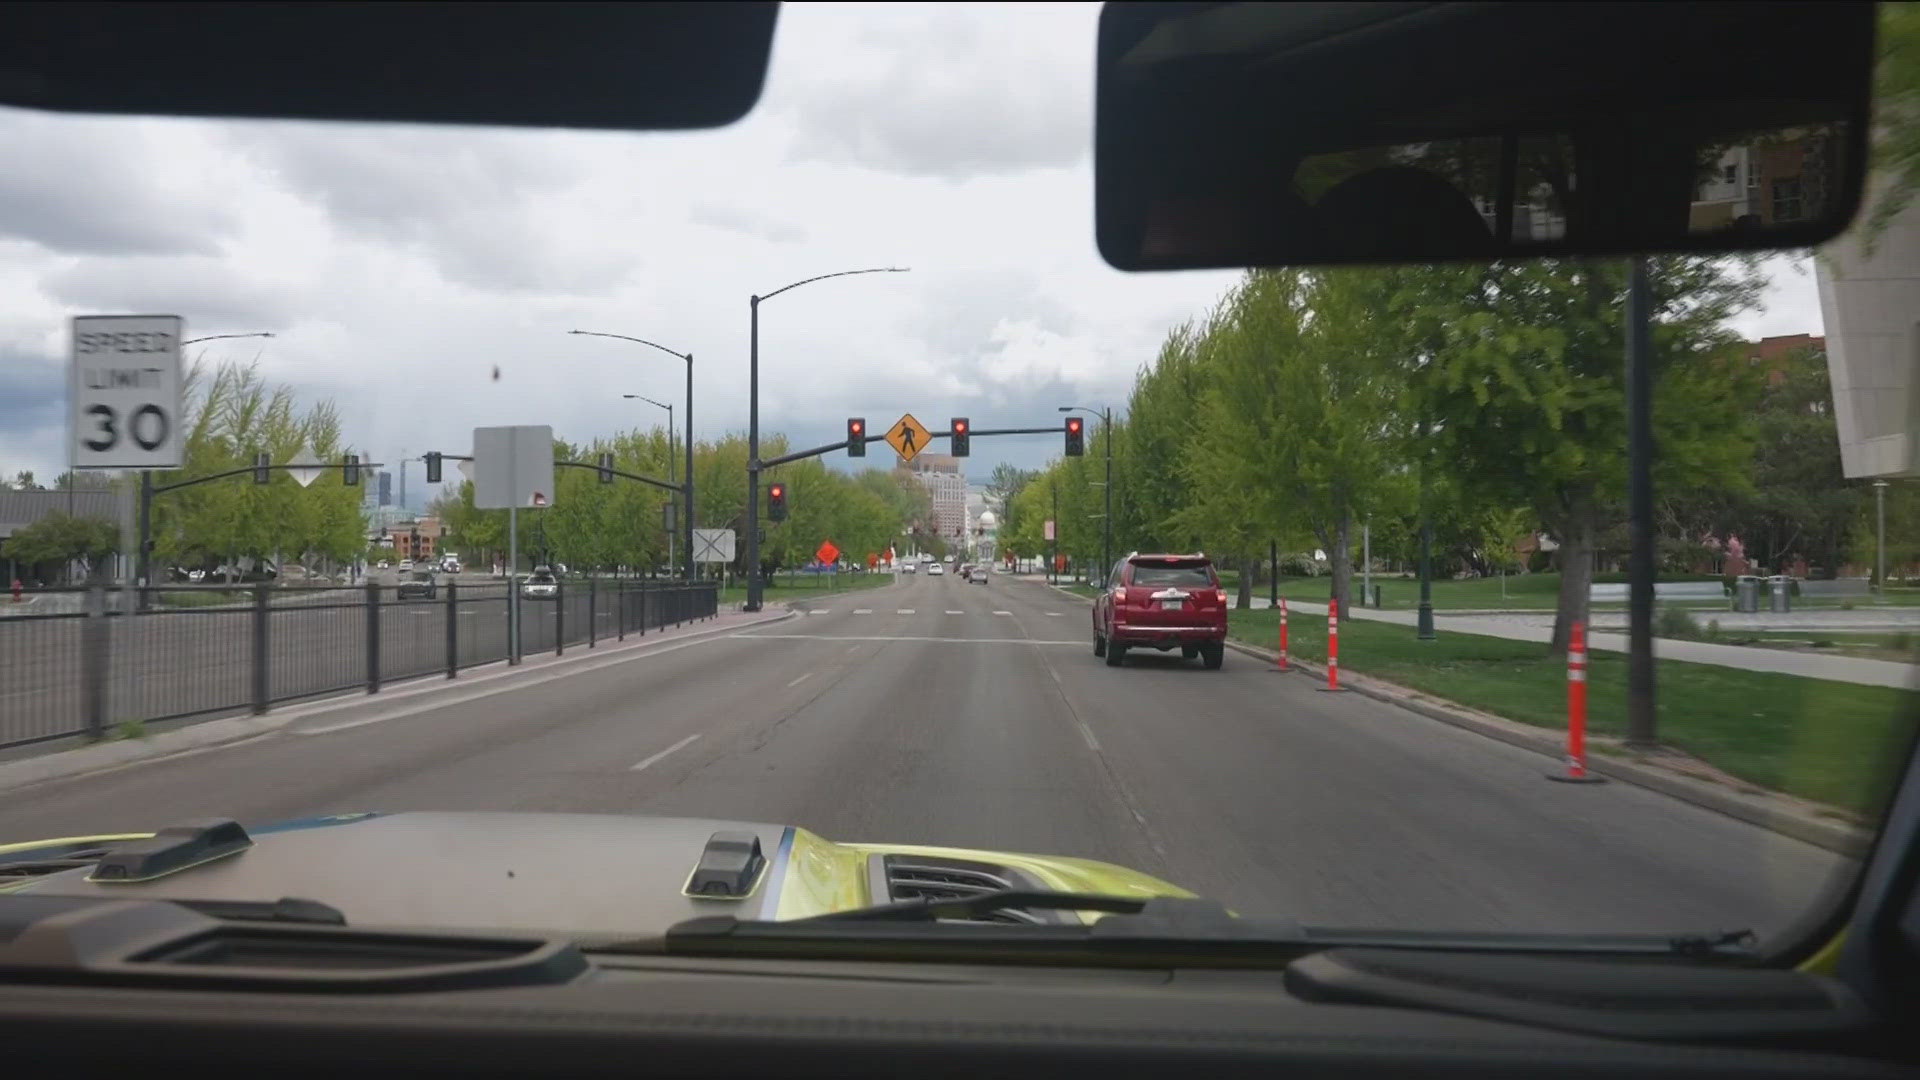 All week, Aspen Shumpert is diving into Idaho's rules of the road, analyzing lesser-known laws and roadway misconceptions in "Idaho Road Rules."